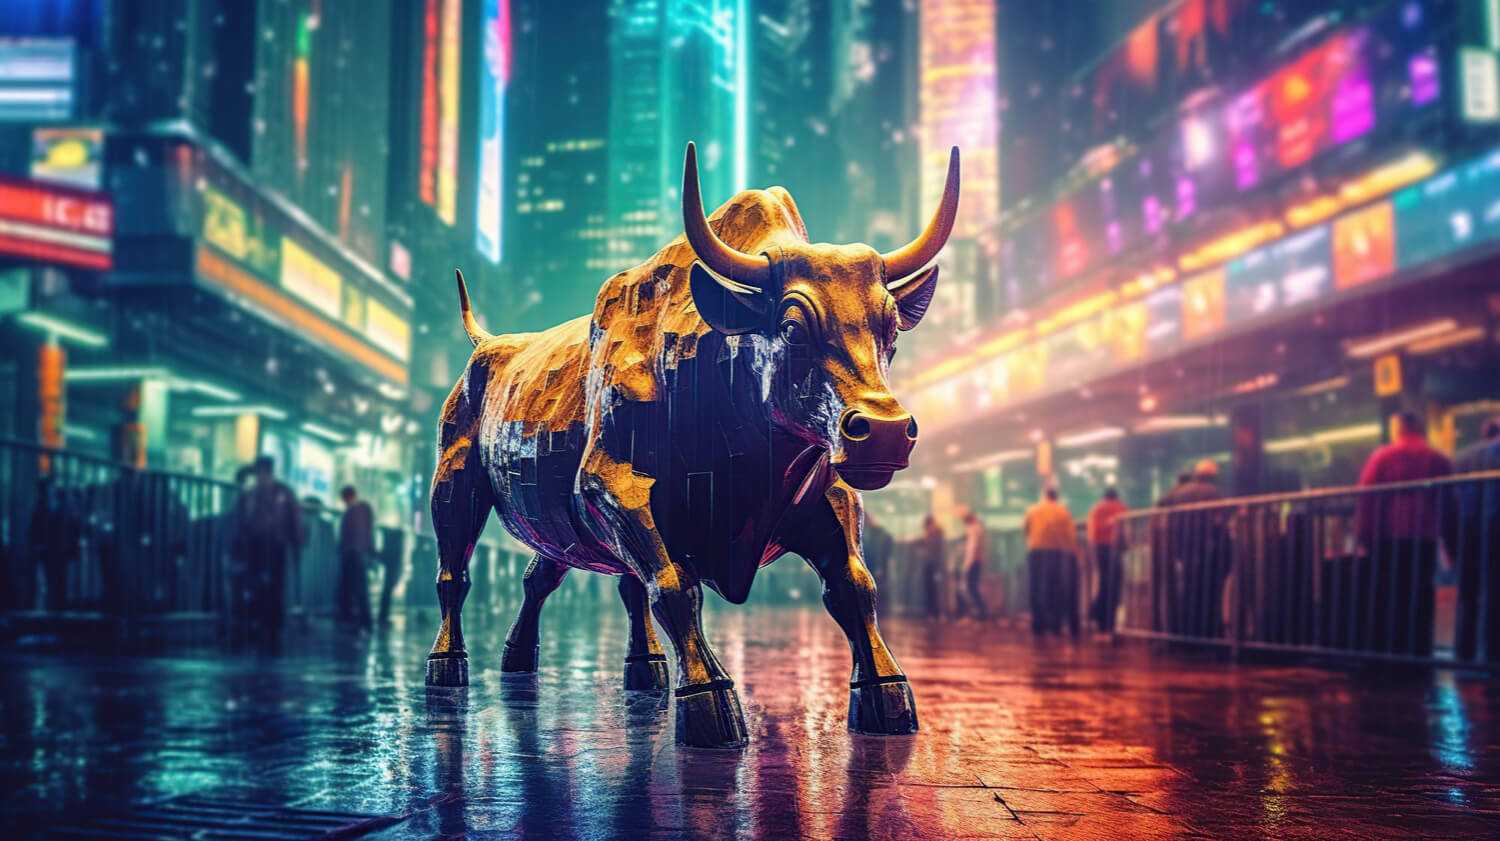 Bitcoin Decentralization- The bull is coming